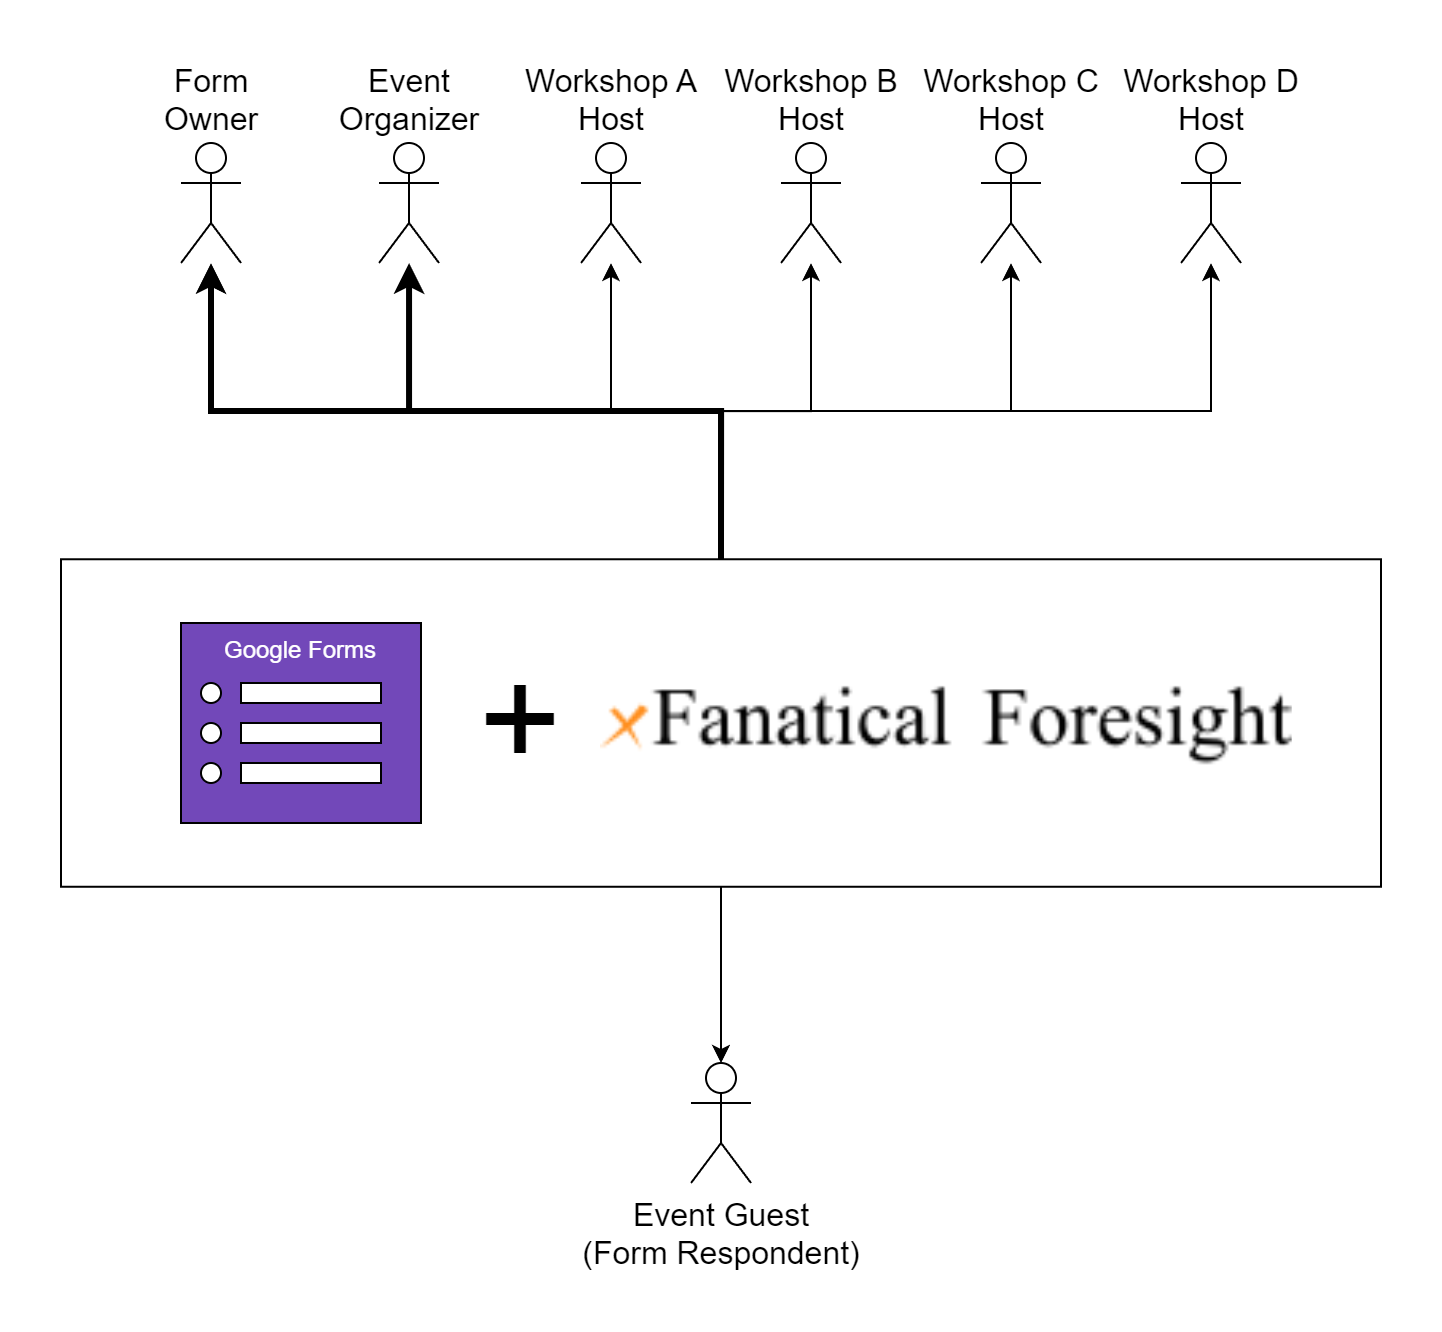 Event registration email notification workflow automation with Google Forms and xFanatical Foresight